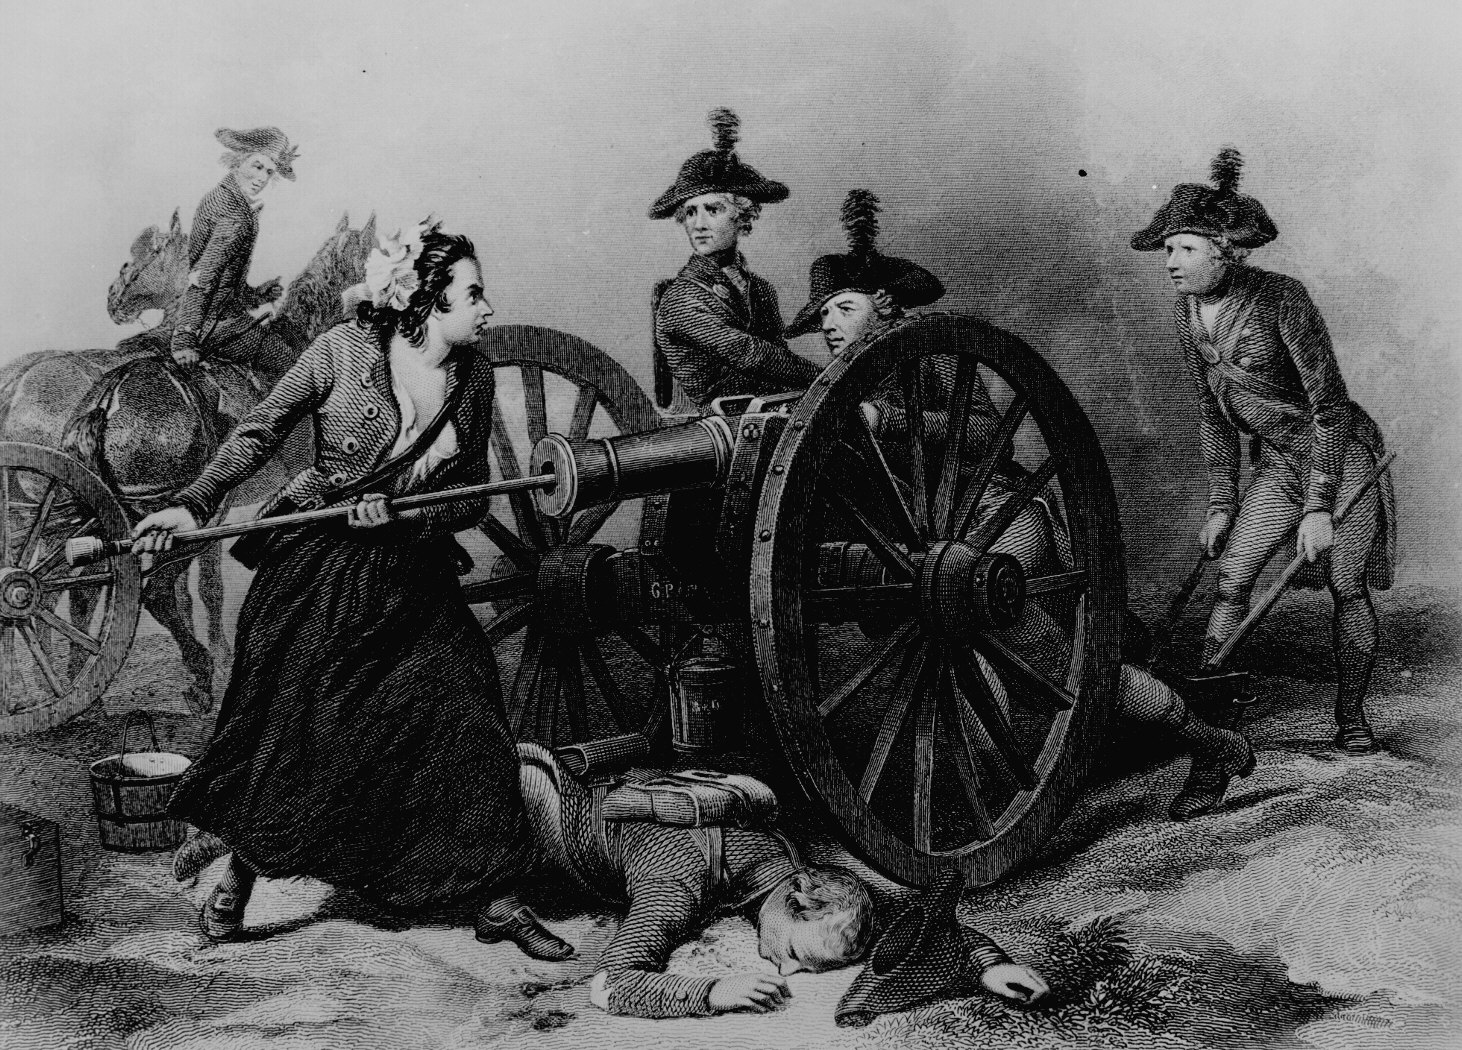 Engraving showing Molly Pitcher working a cannon at the Battle of Monmouth